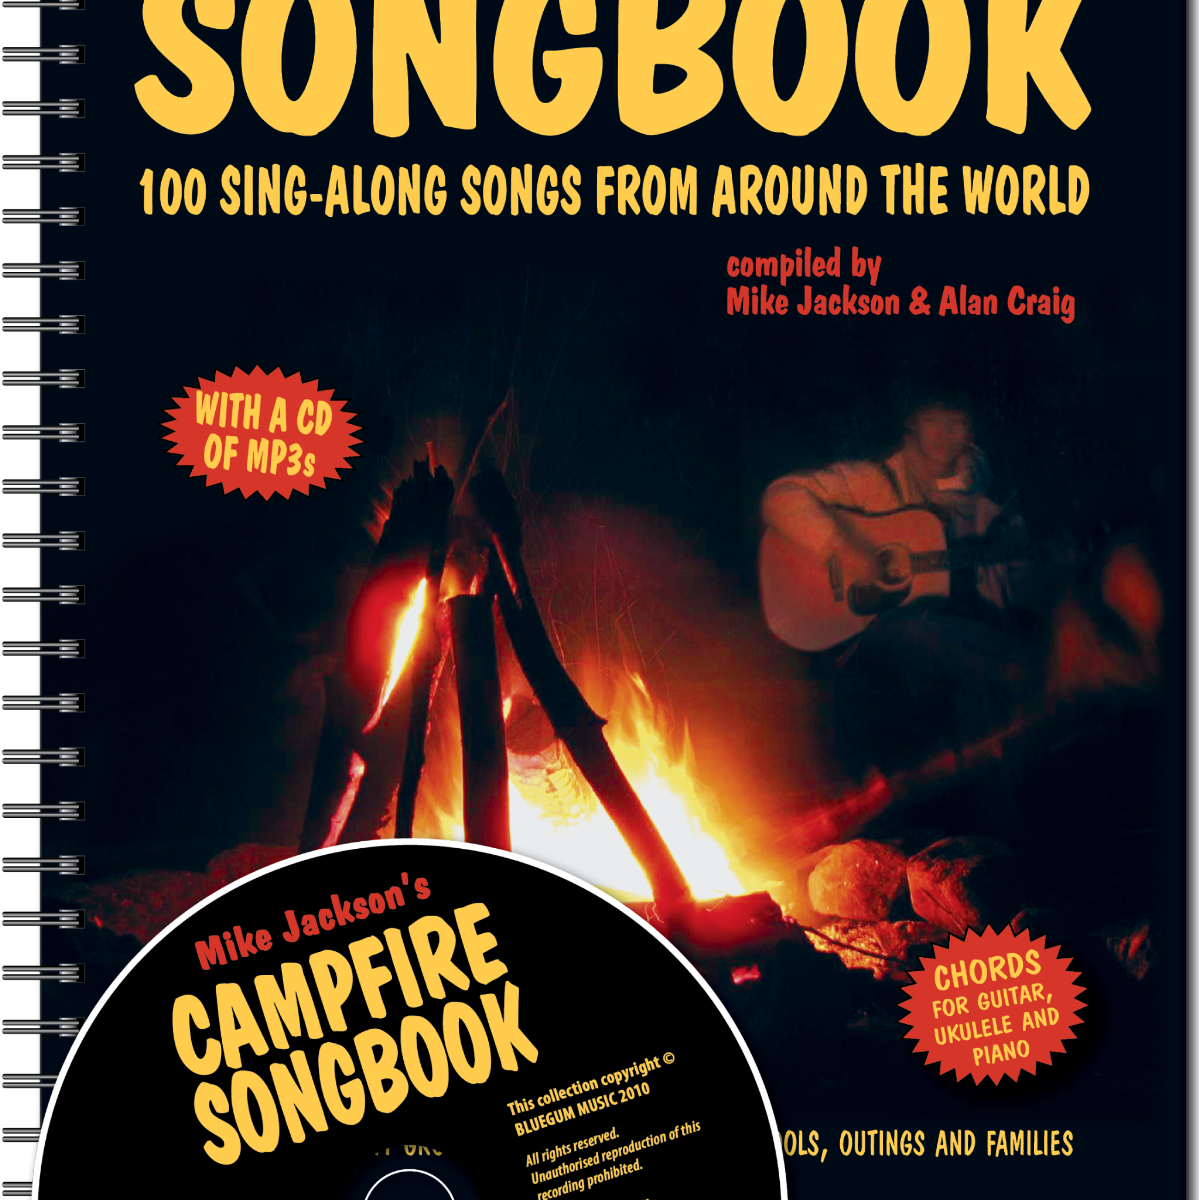 CAMPFIRE SONGBOOK Kit